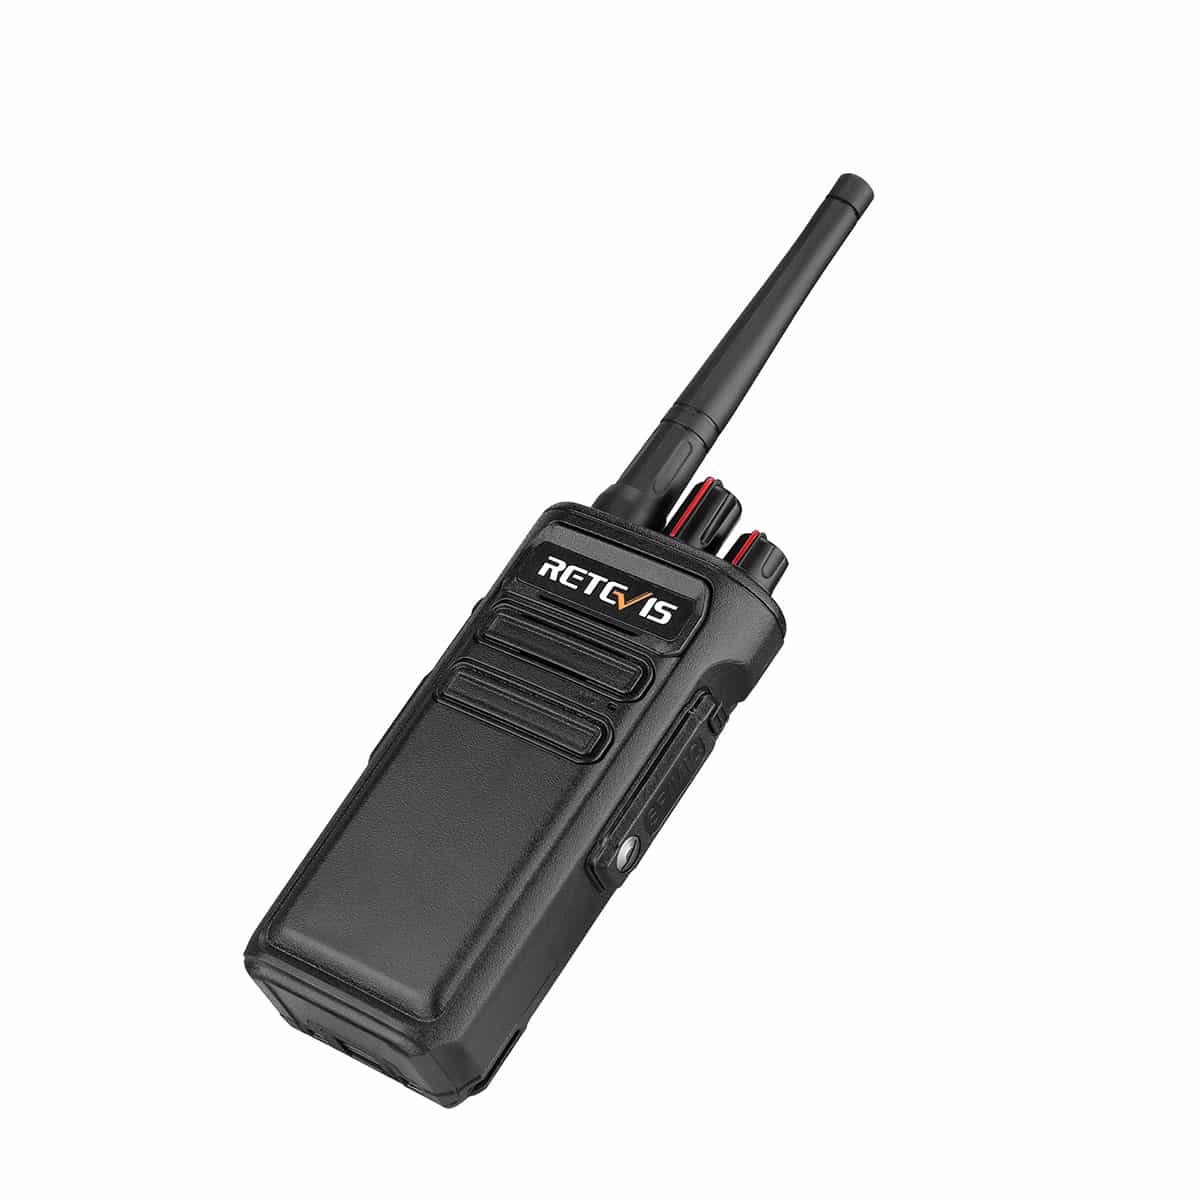 retevis rb23 portable gmrs walkie talkie